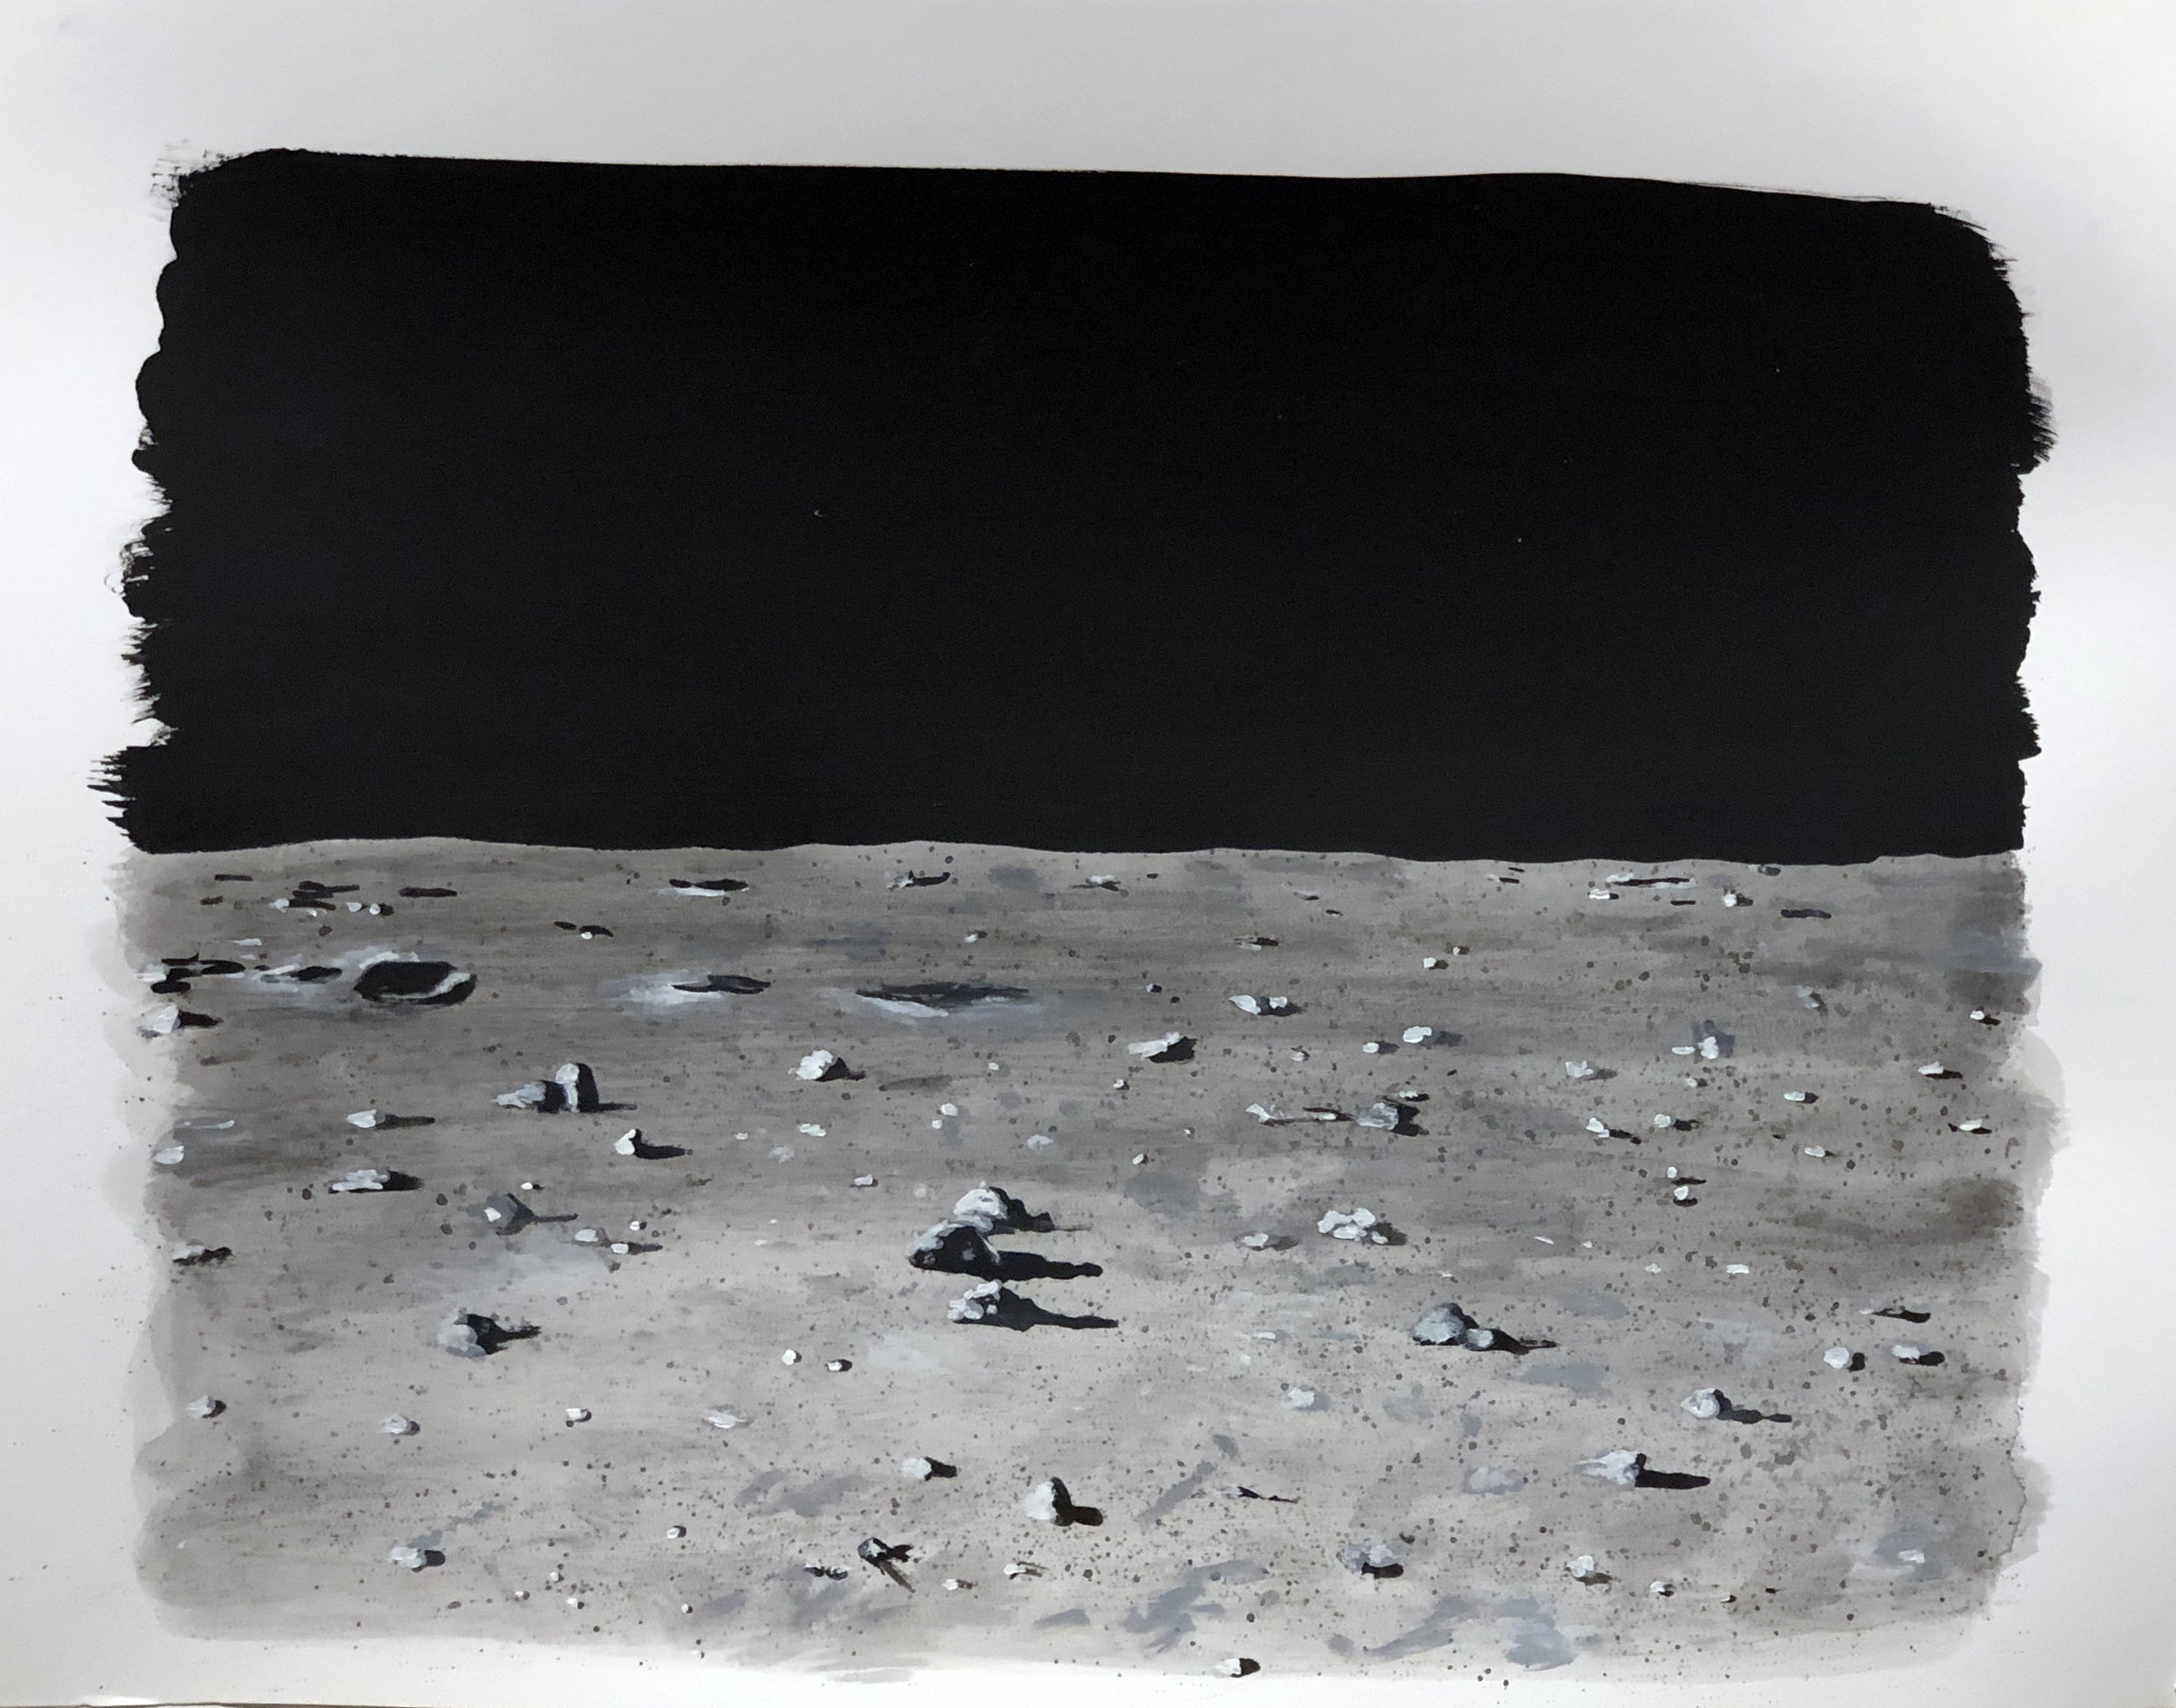   Untitled (Moon),  2019 Acrylic and black gesso on paper 11 x 14 inches (28cm x 35cm) 